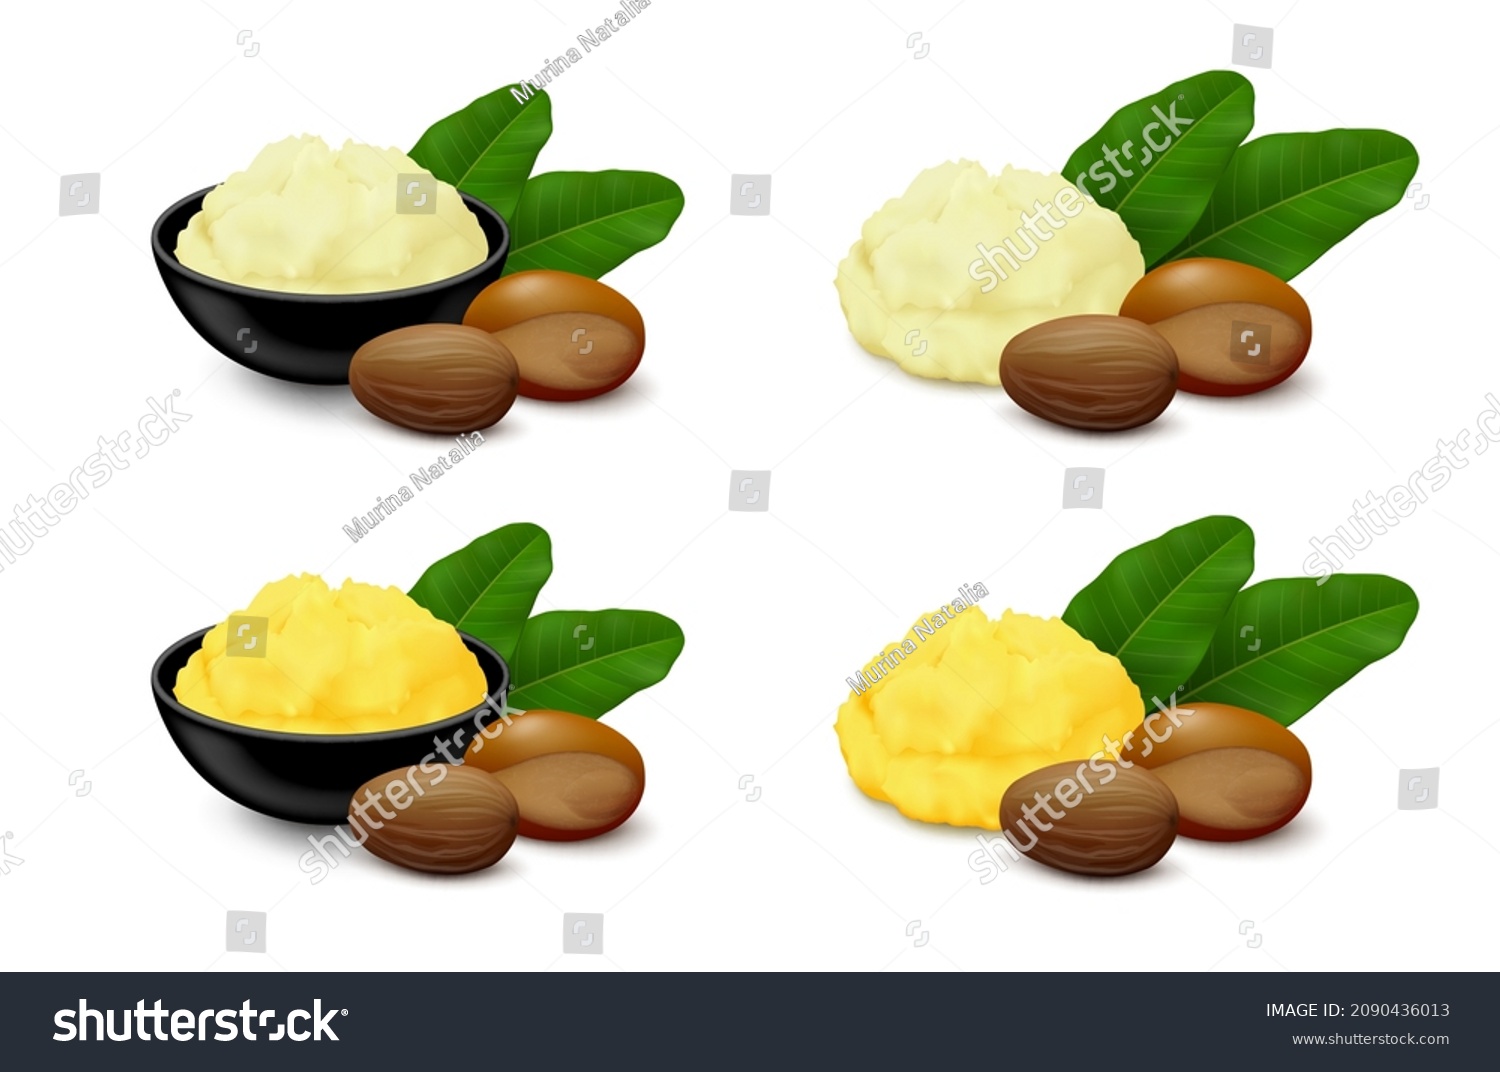 SVG of Shea (Vitellaria paradoxa) butter in various colors (ivory, yellow) with nuts (shelled, unshelled) and leaves isolated on white background. Side view. Realistic vector illustration. svg